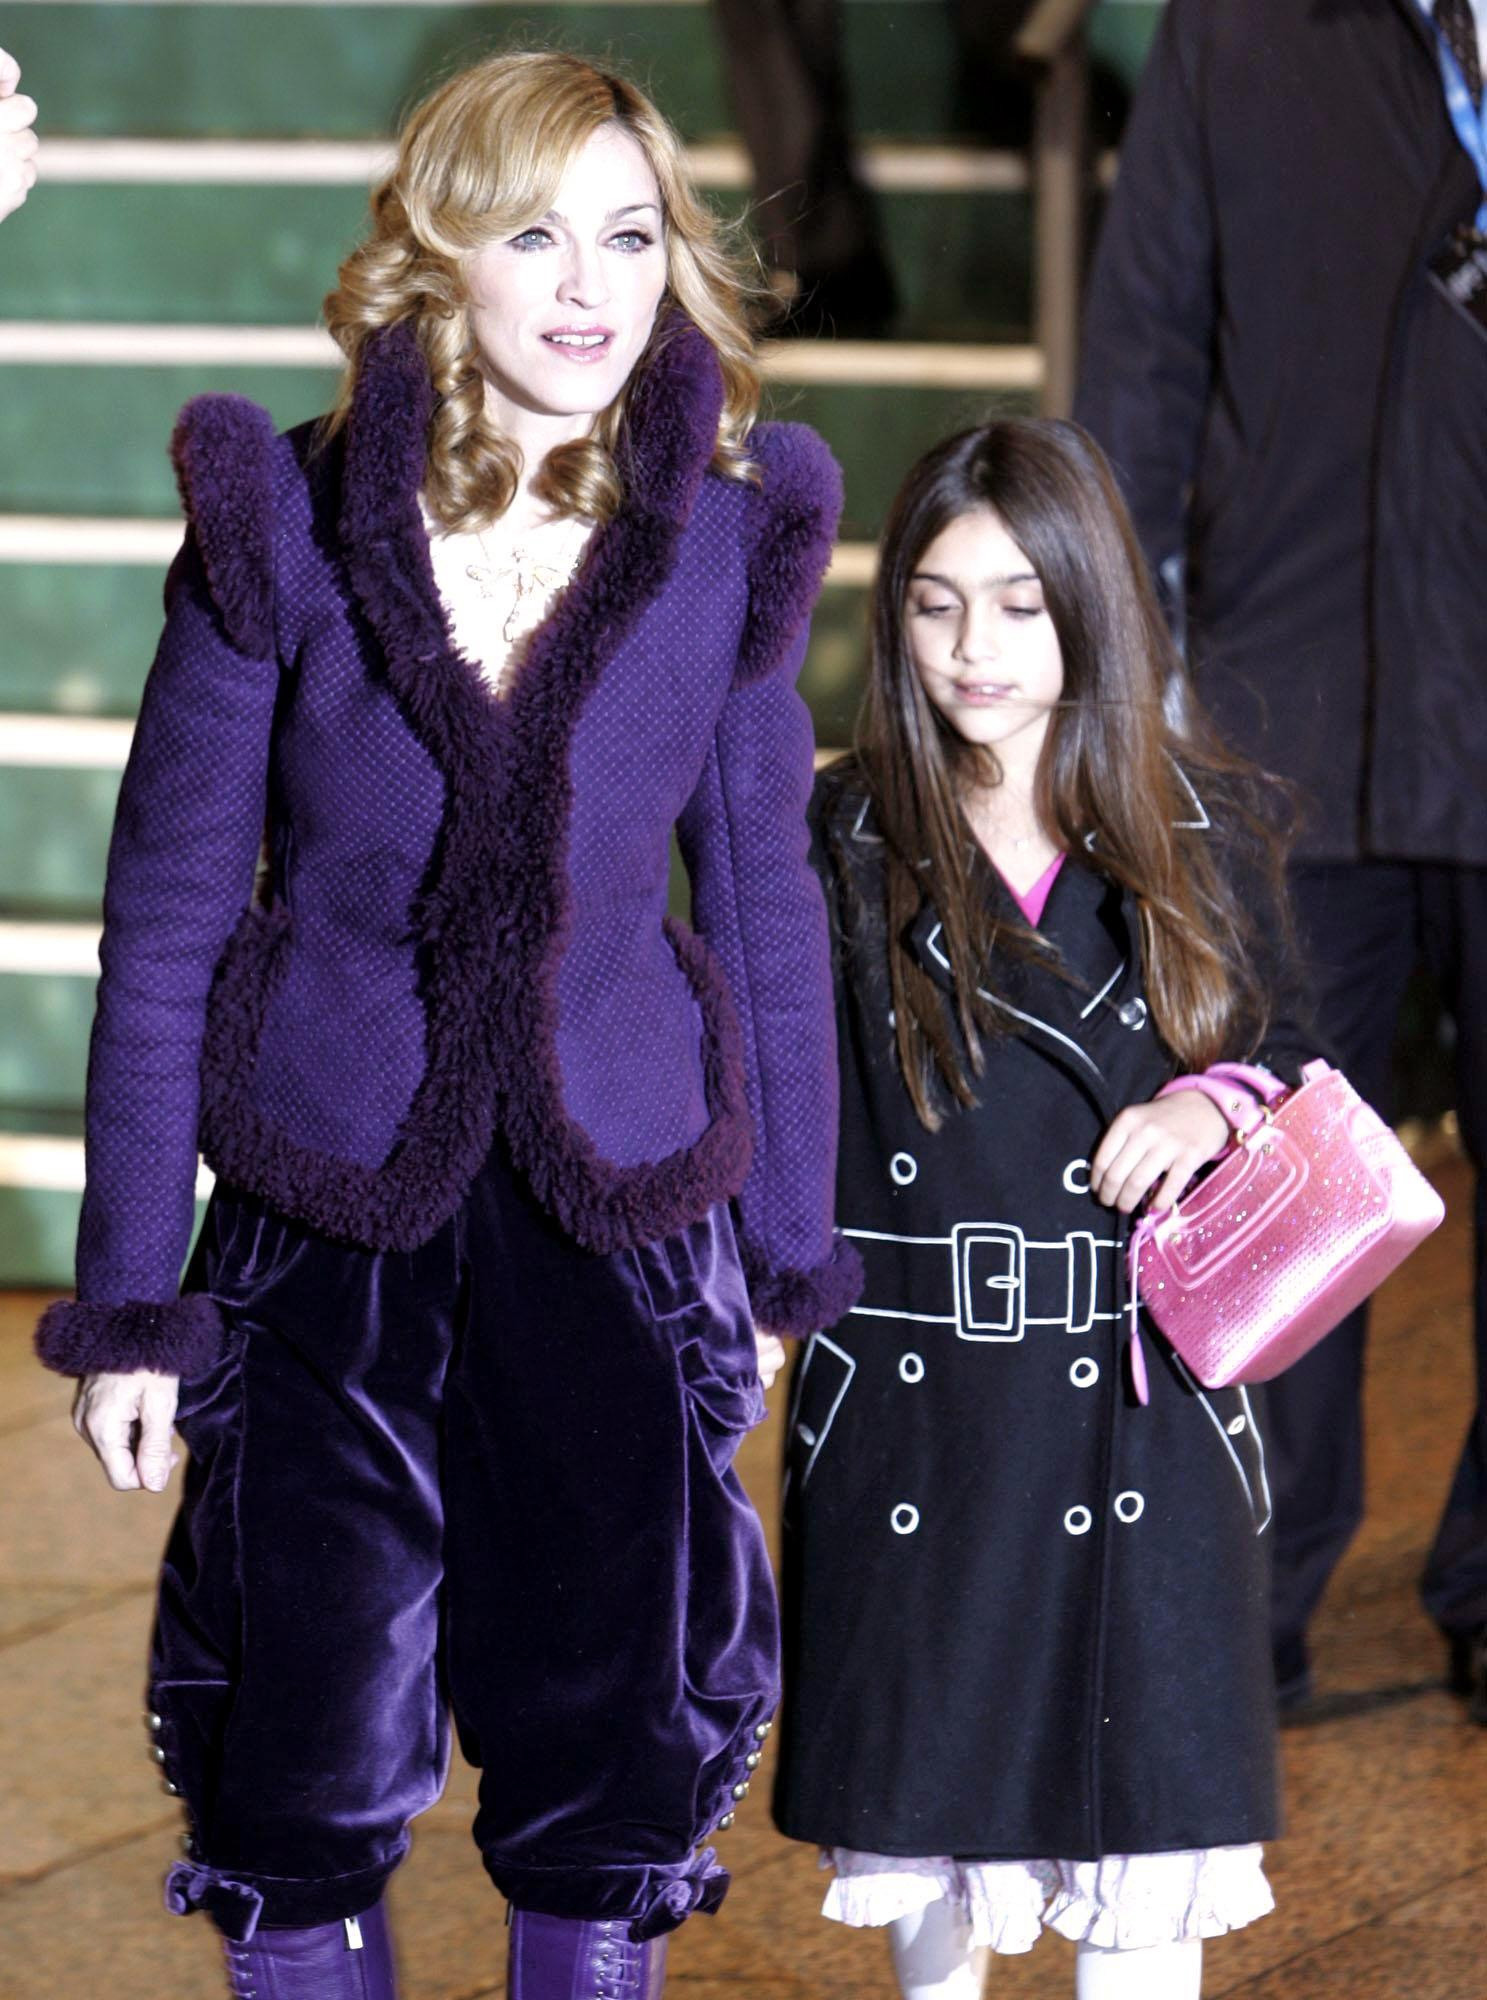 Madonna with her daughter Lourdes "Lola" Leon on November 6, 2005 in London | Source: Getty Images